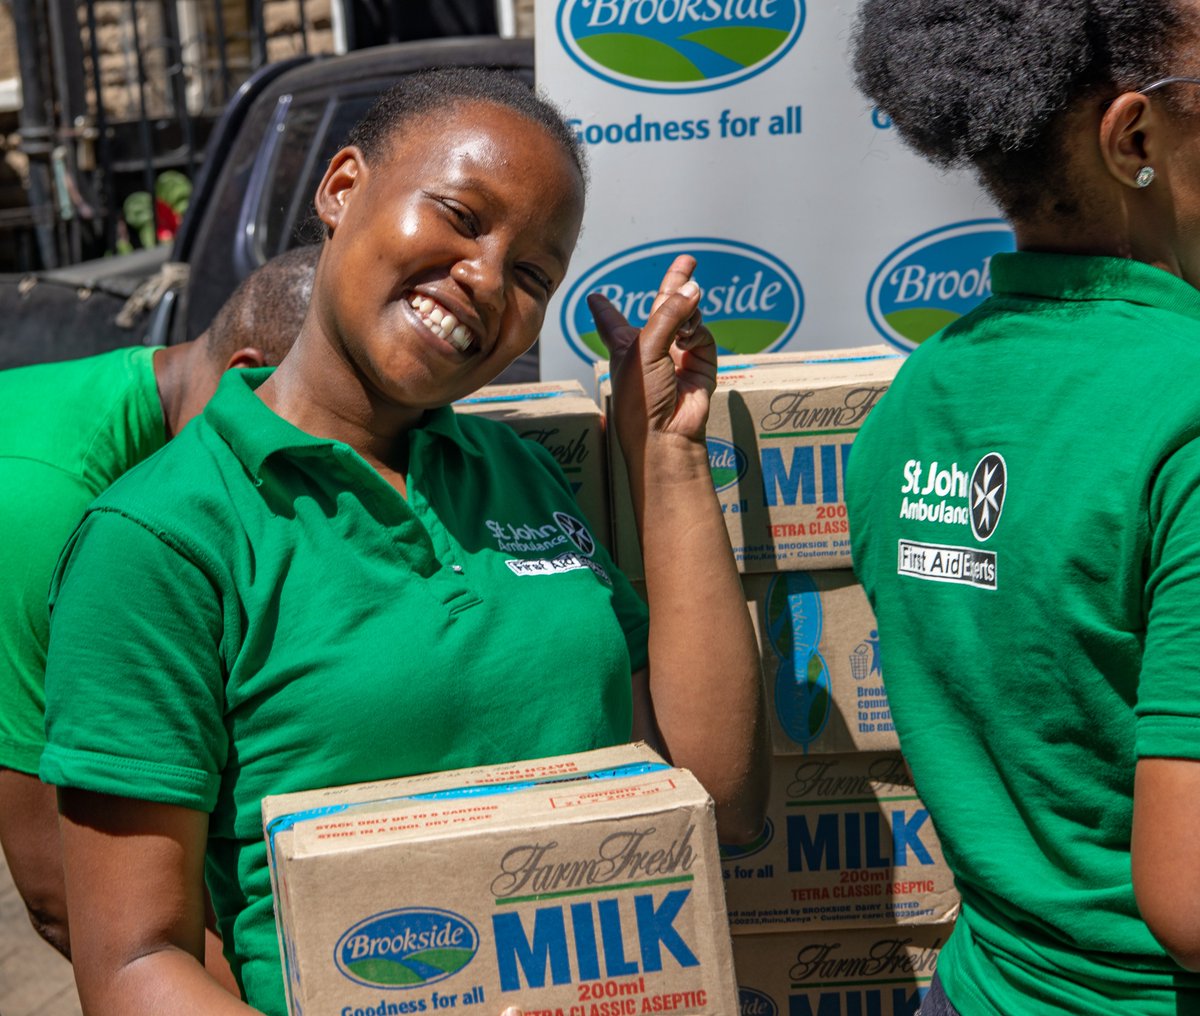 We thank you @BrooksideLtd for your donation of milk through St John Ambulance Kenya. This donation is timely and will support the families that are currently displaced from their homes by the floods that ravaged various places in Kenya. #floodsresponseke #Floods